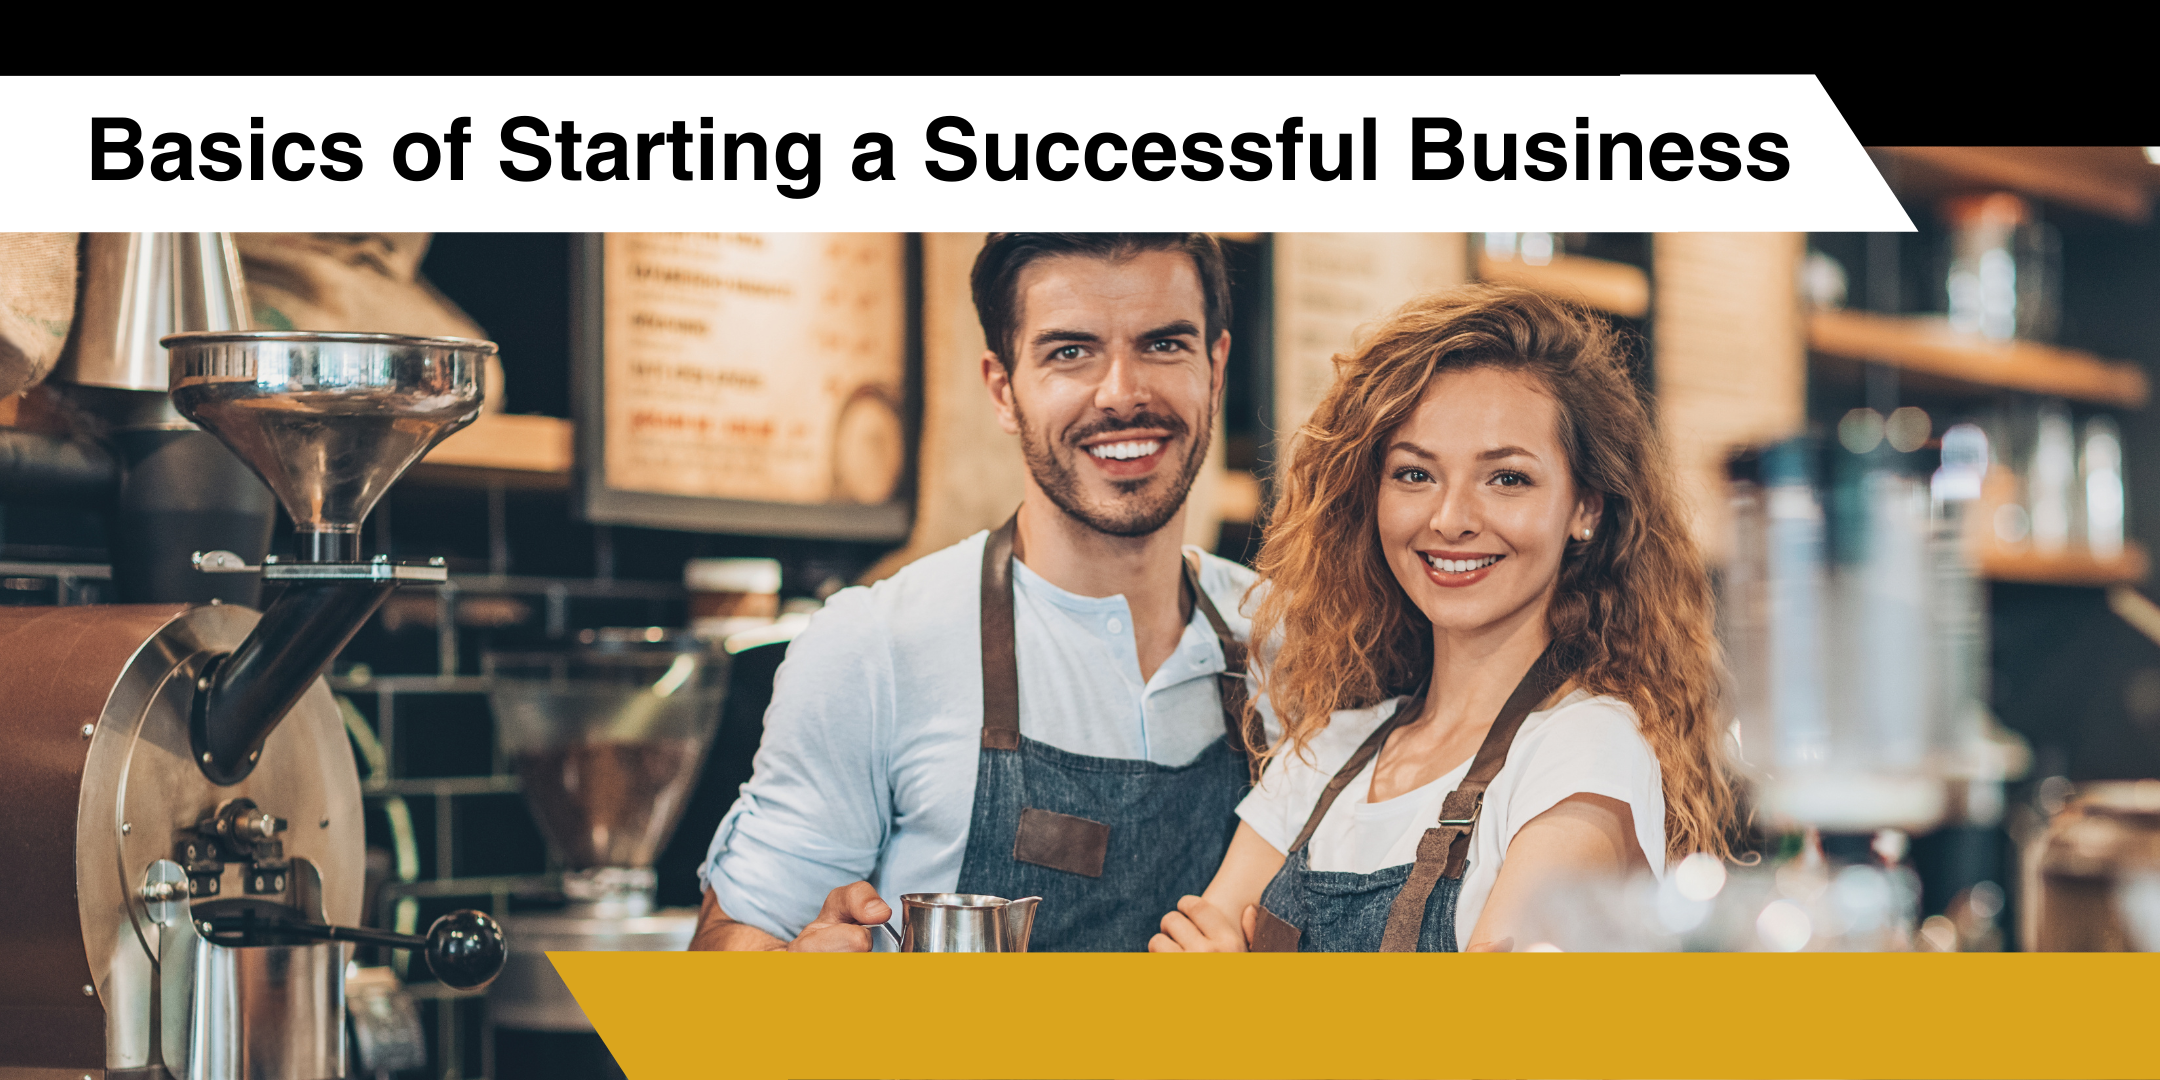 Basics of Starting a Successful Business